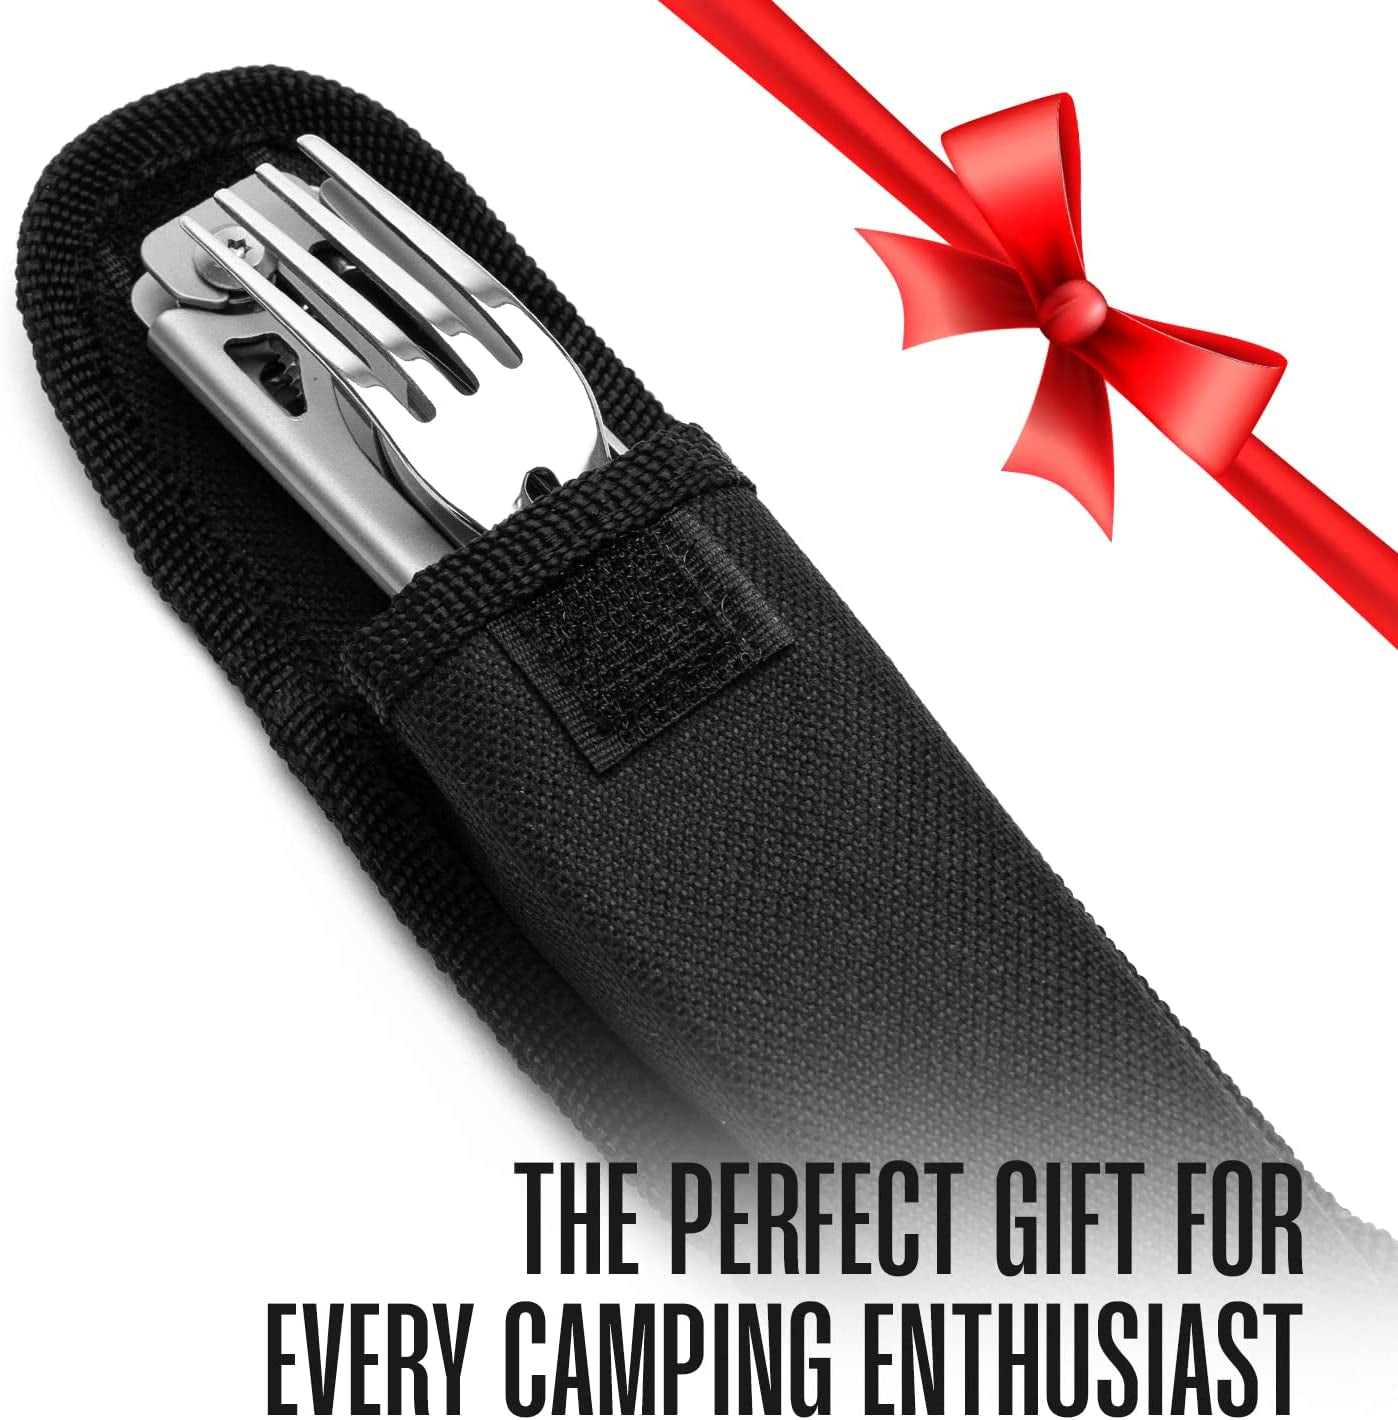 Camping Utensils - 4 in 1 Stainless Steel, Safety Locking Camping Accessories with Durable Sheath - Compact Multi Tool for Camping with Knive, Spoon, Fork, Bottle Opener by